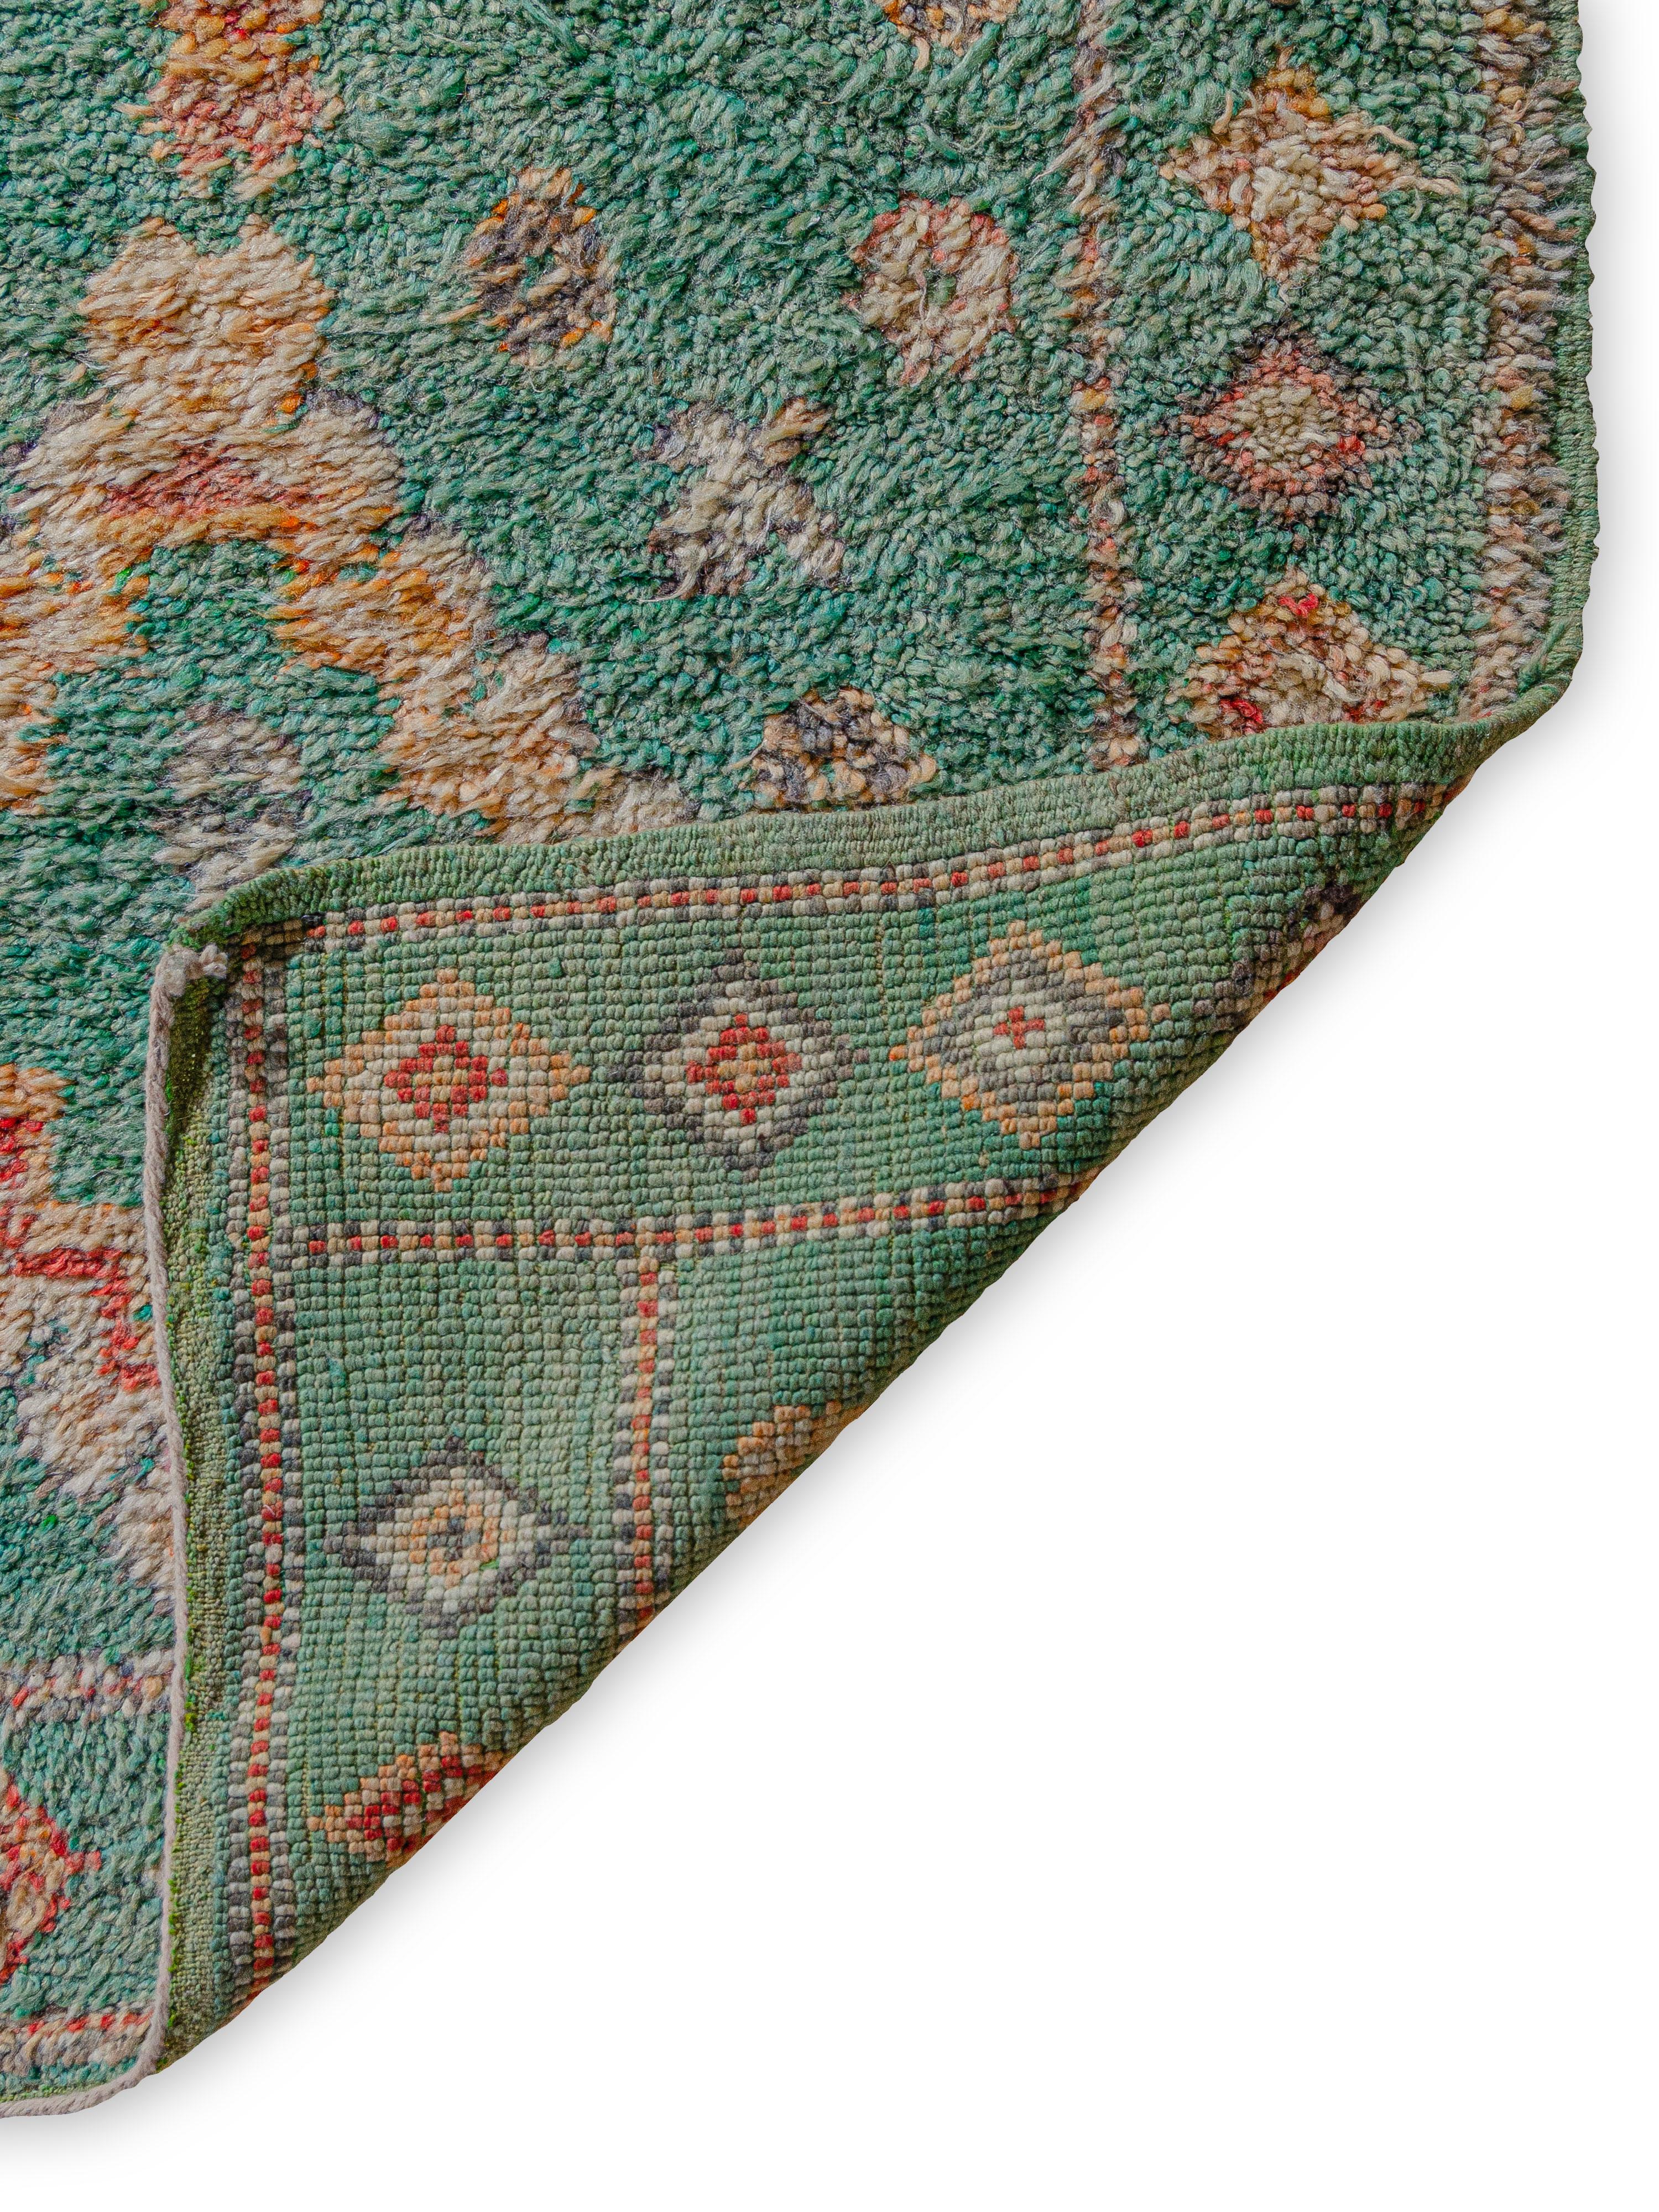 Hand-Woven Unusual Moroccan Beni M'Guild Carpet in jade green curated by Breuckelen Berber For Sale